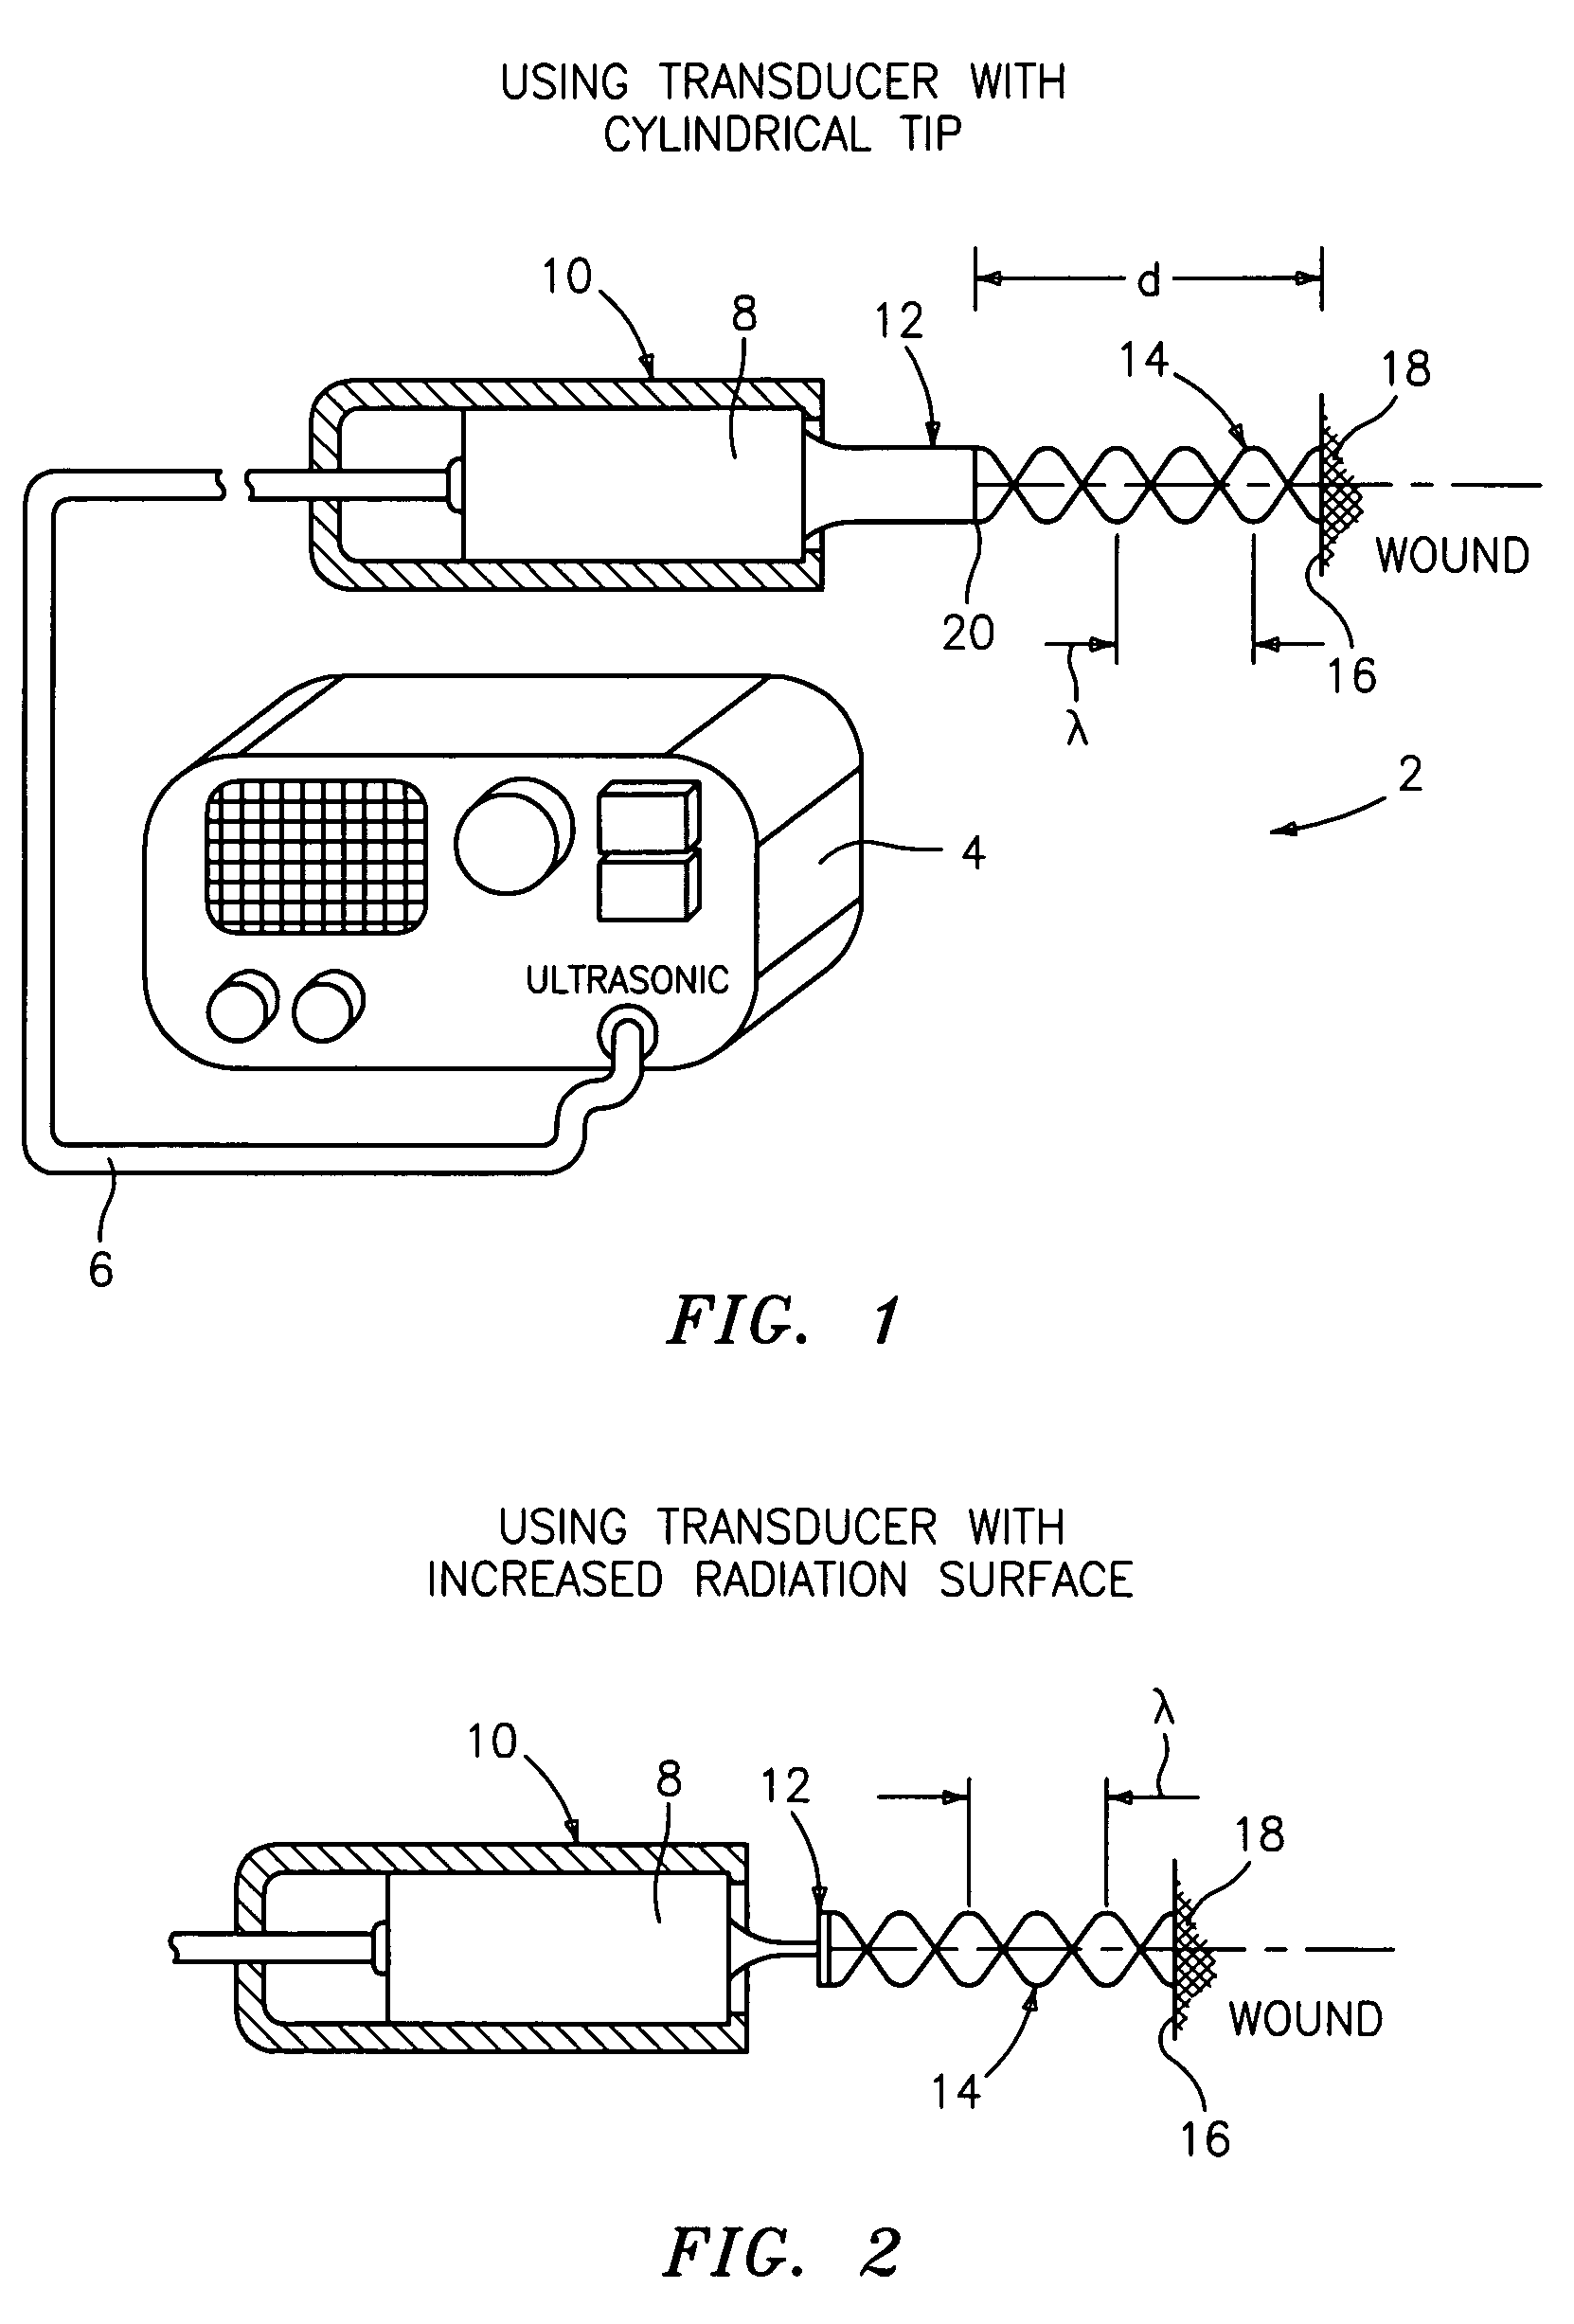 Ultrasound wound treatment method and device using standing waves